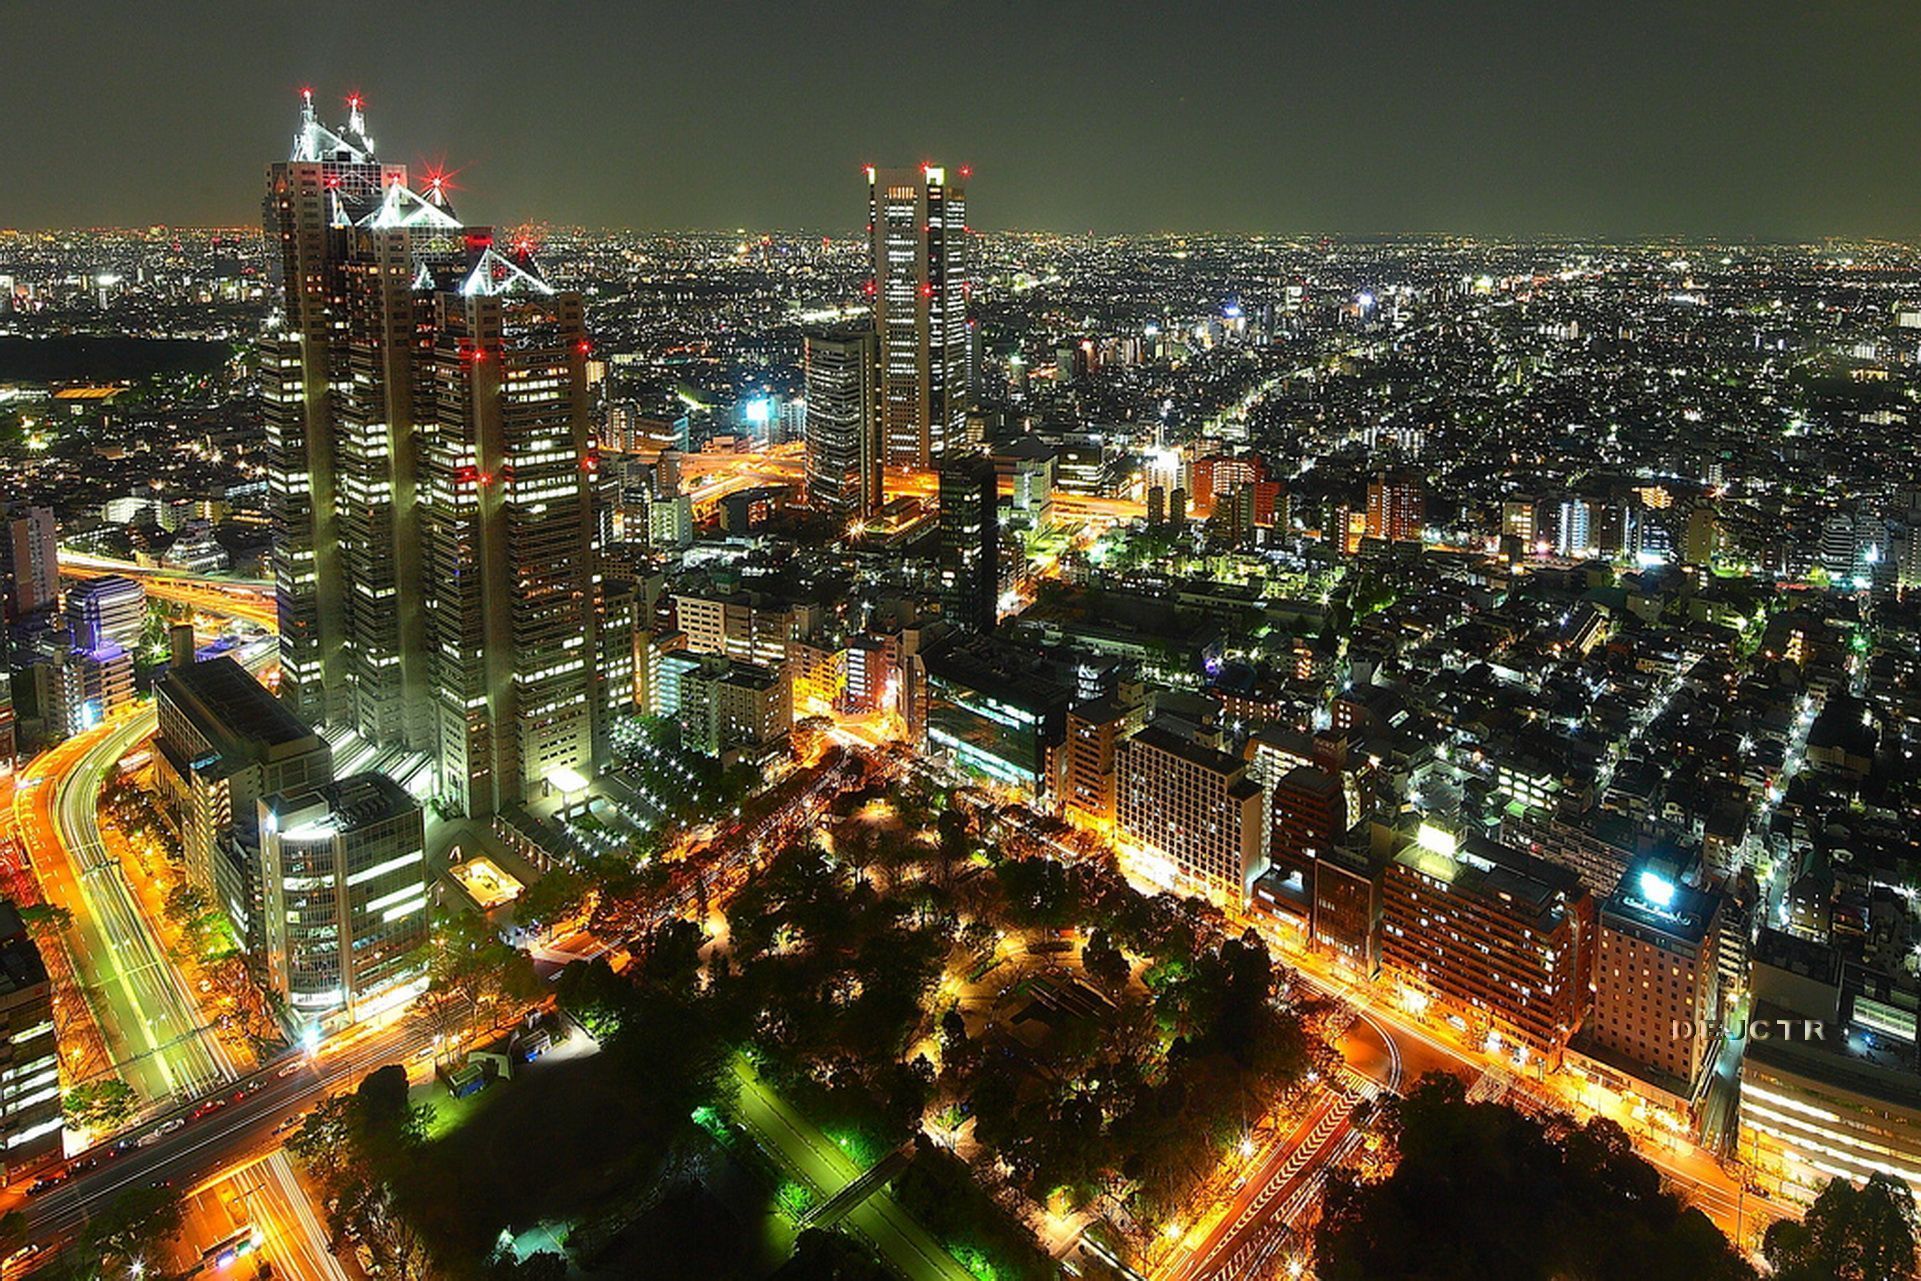 Top Tokyo City Night Images for Pinterest